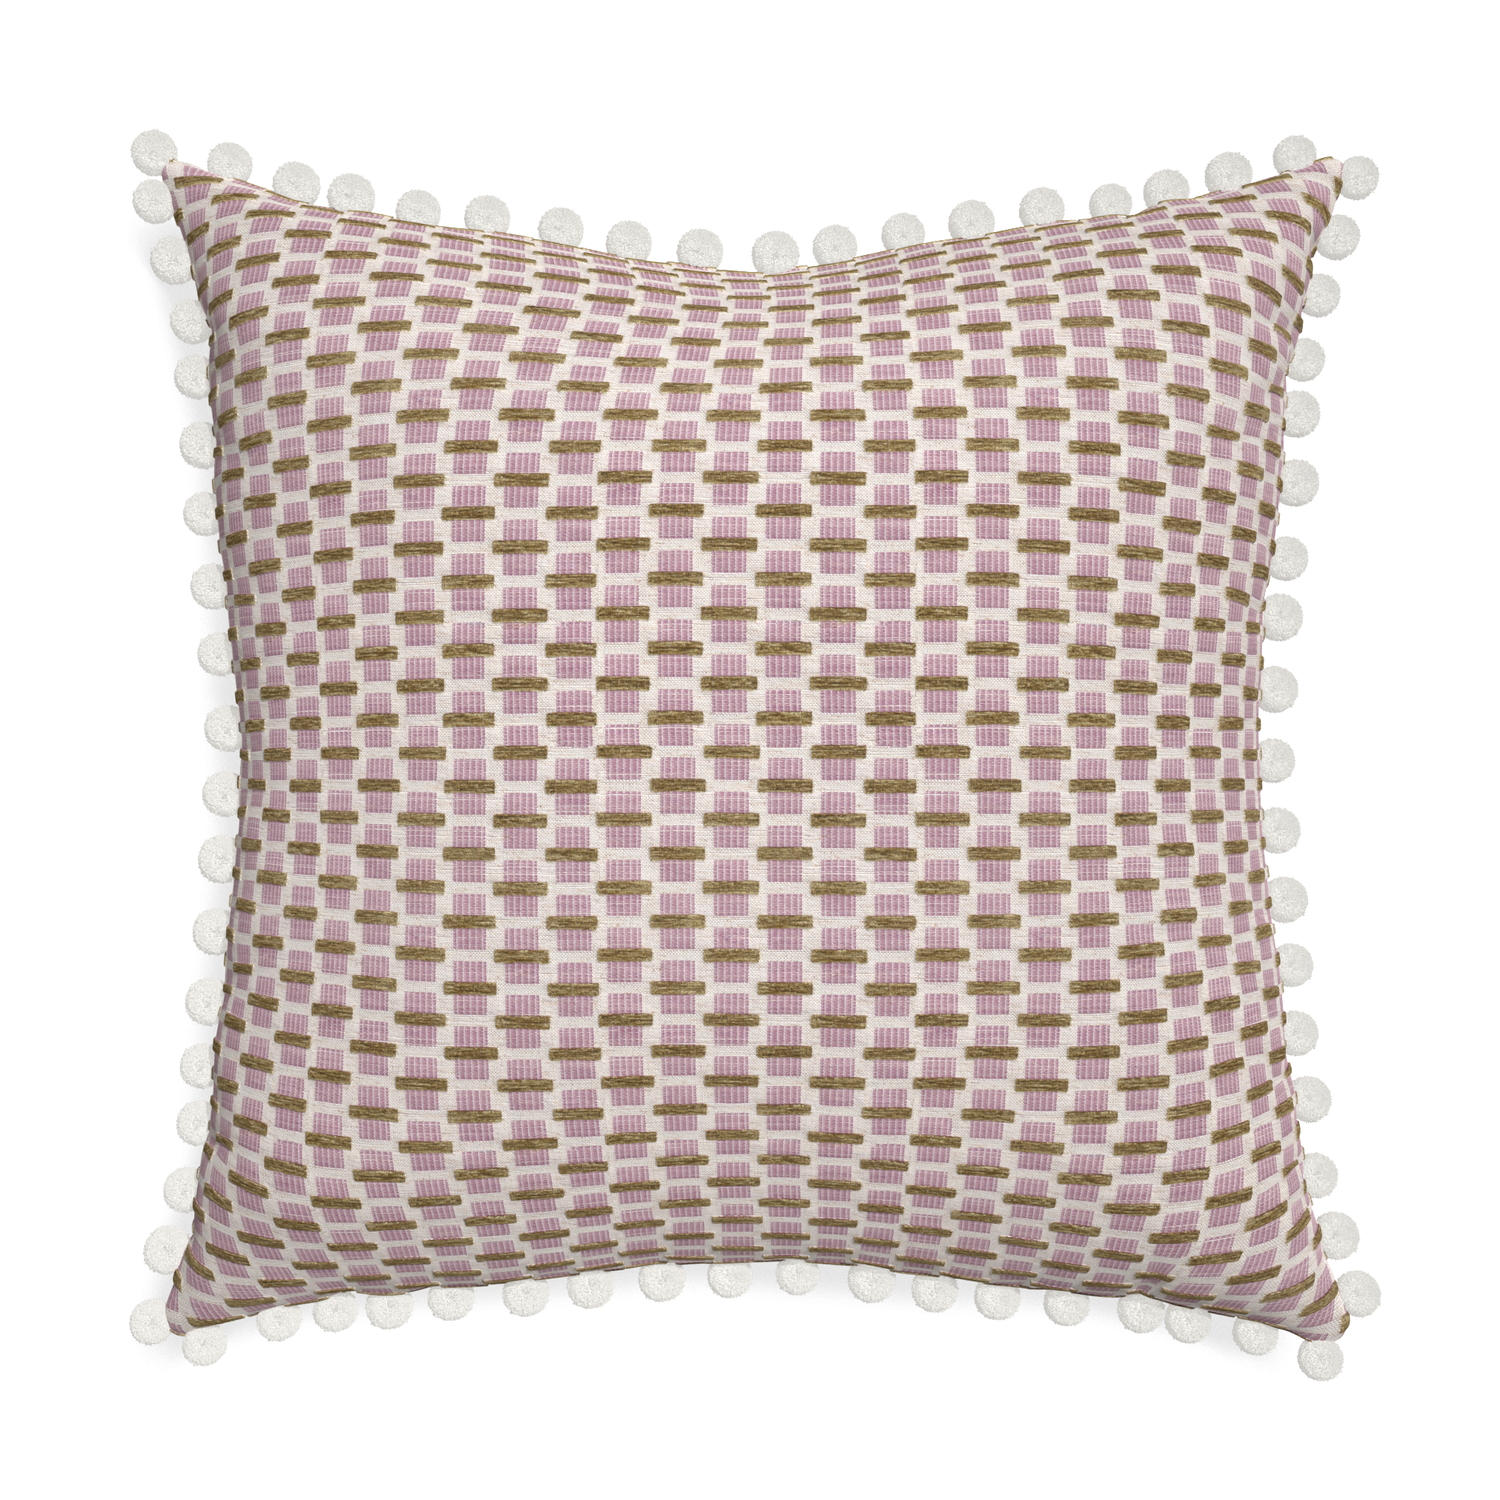 Euro-sham willow orchid custom pink geometric chenillepillow with snow pom pom on white background